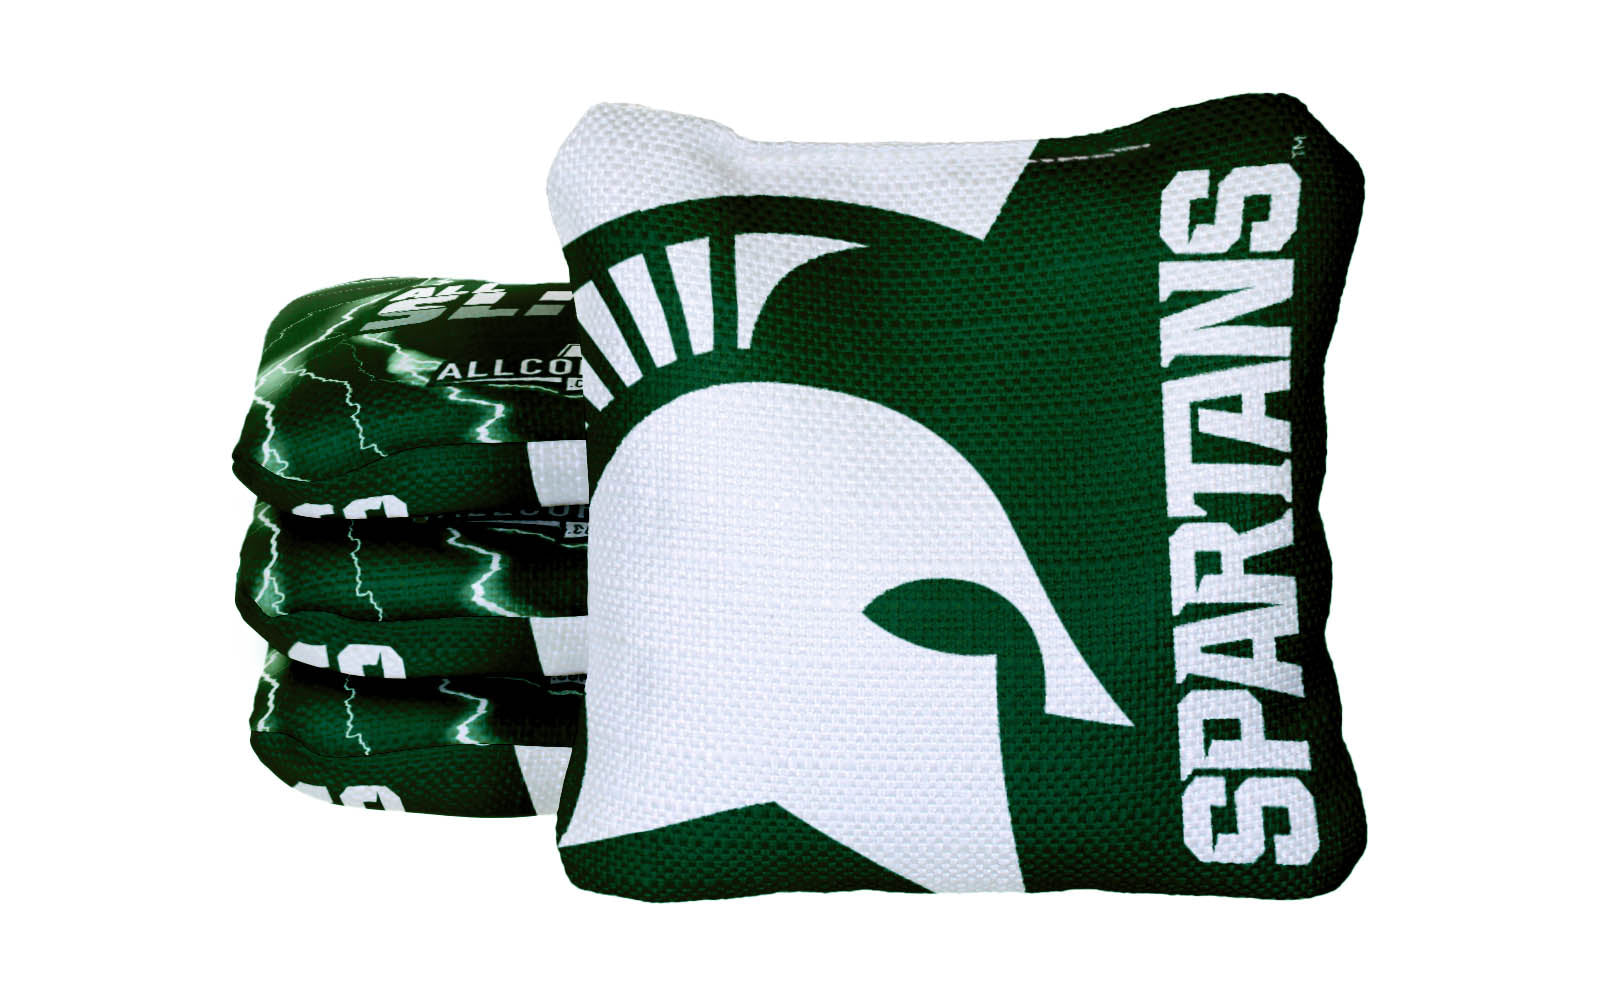 Officially Licensed Collegiate Cornhole Bags - All-Slide 2.0 - Set of 4 - Michigan State University